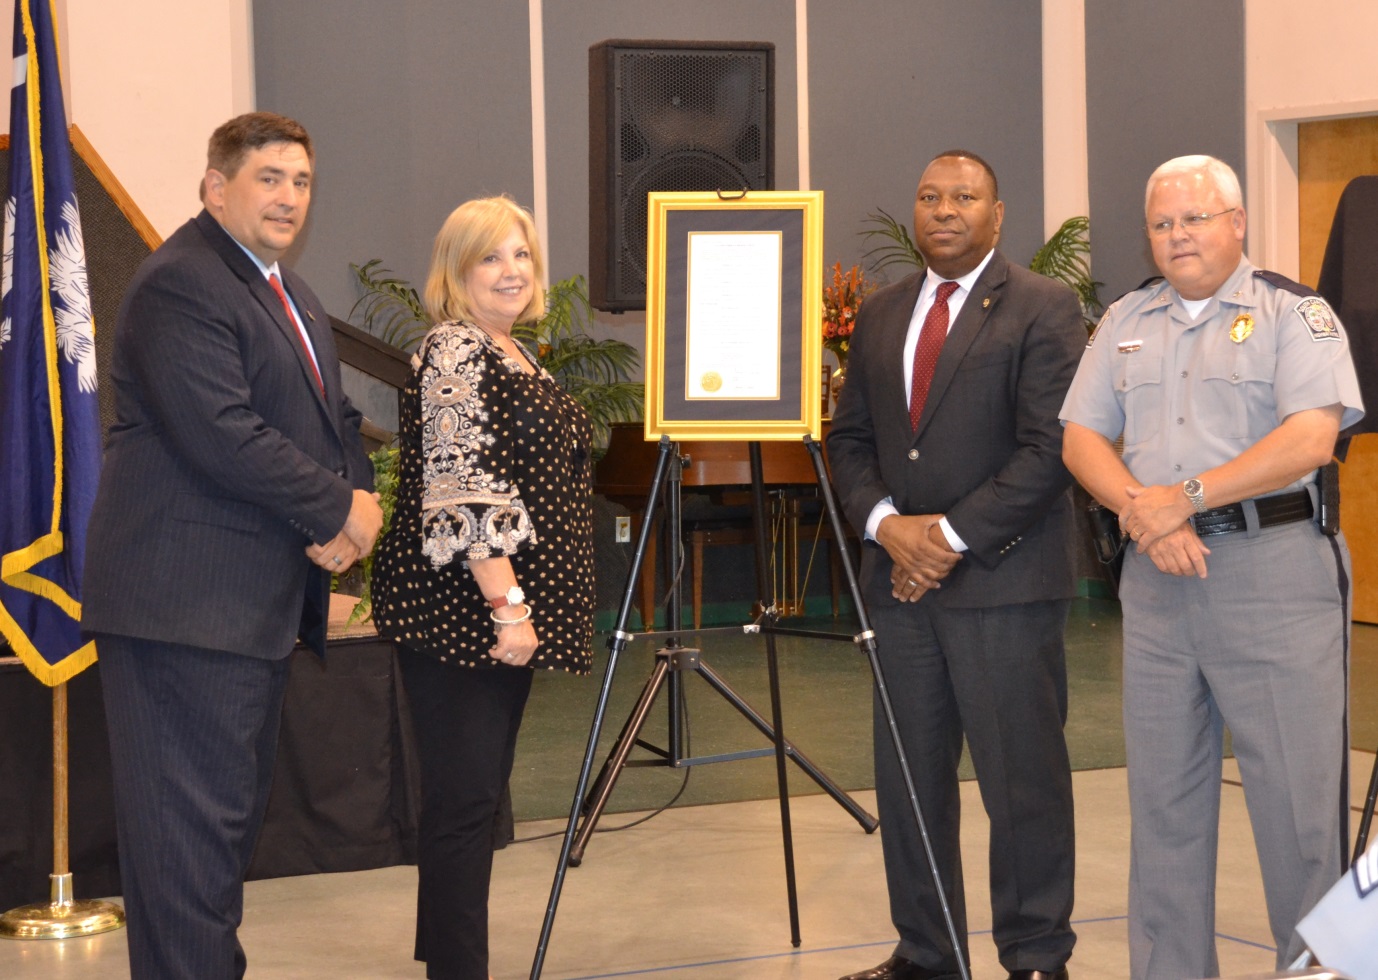 Family of Patrolman Harlan Smith with Director Smith and Col. Oliver